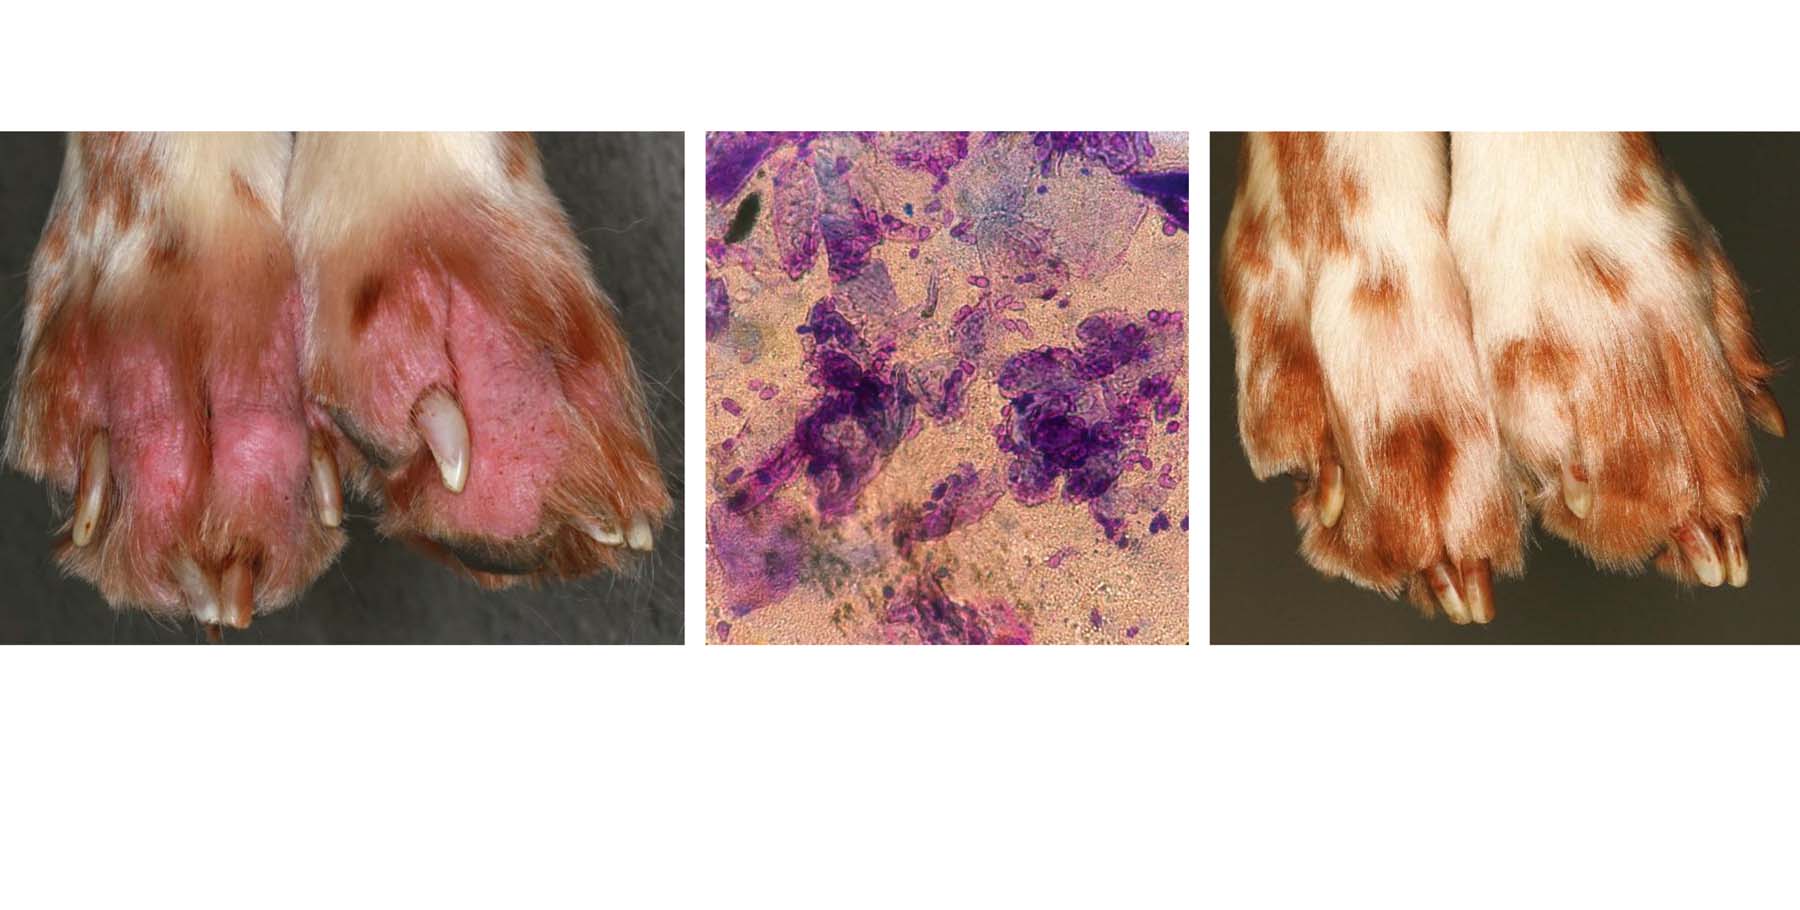 Primary Atopic Dermatitis with Secondary Malassezia Yeast Pododermatitis: Initial Presentation, Immediate Cytology, During Treatment, English Setter